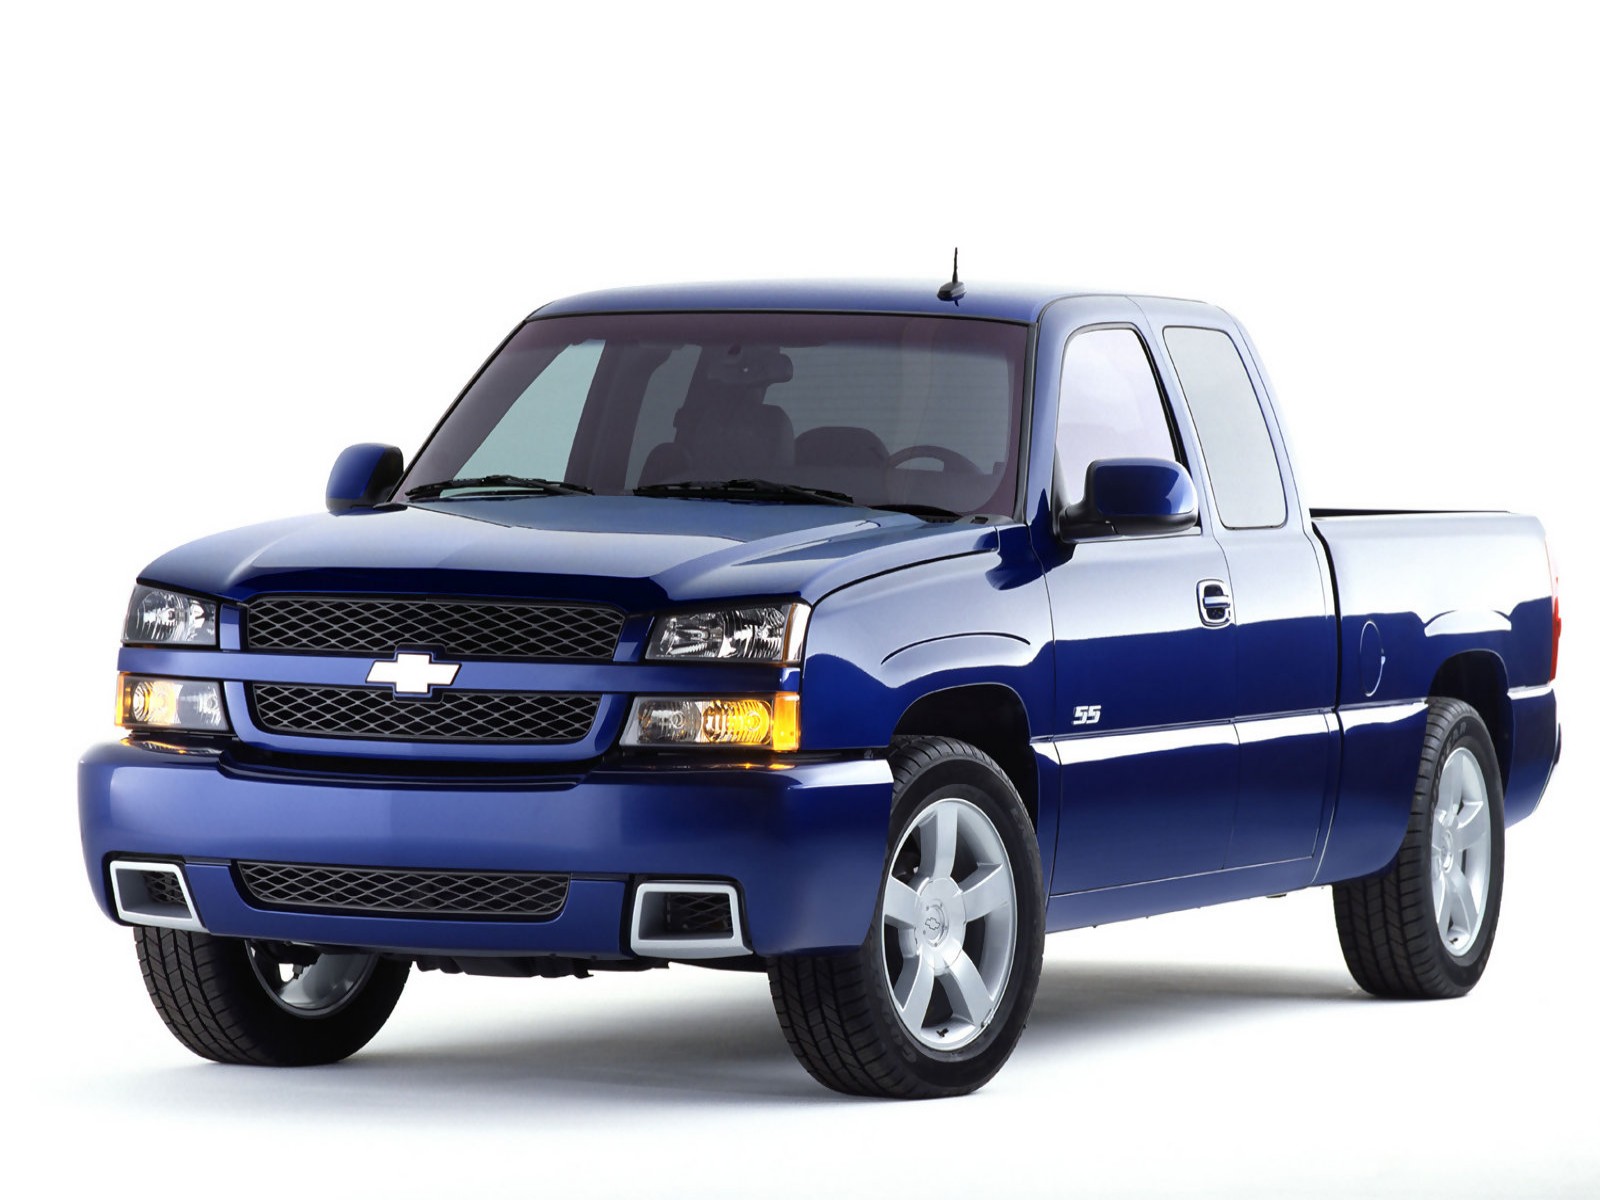 Chevy Silverado Release Date Price And Specs